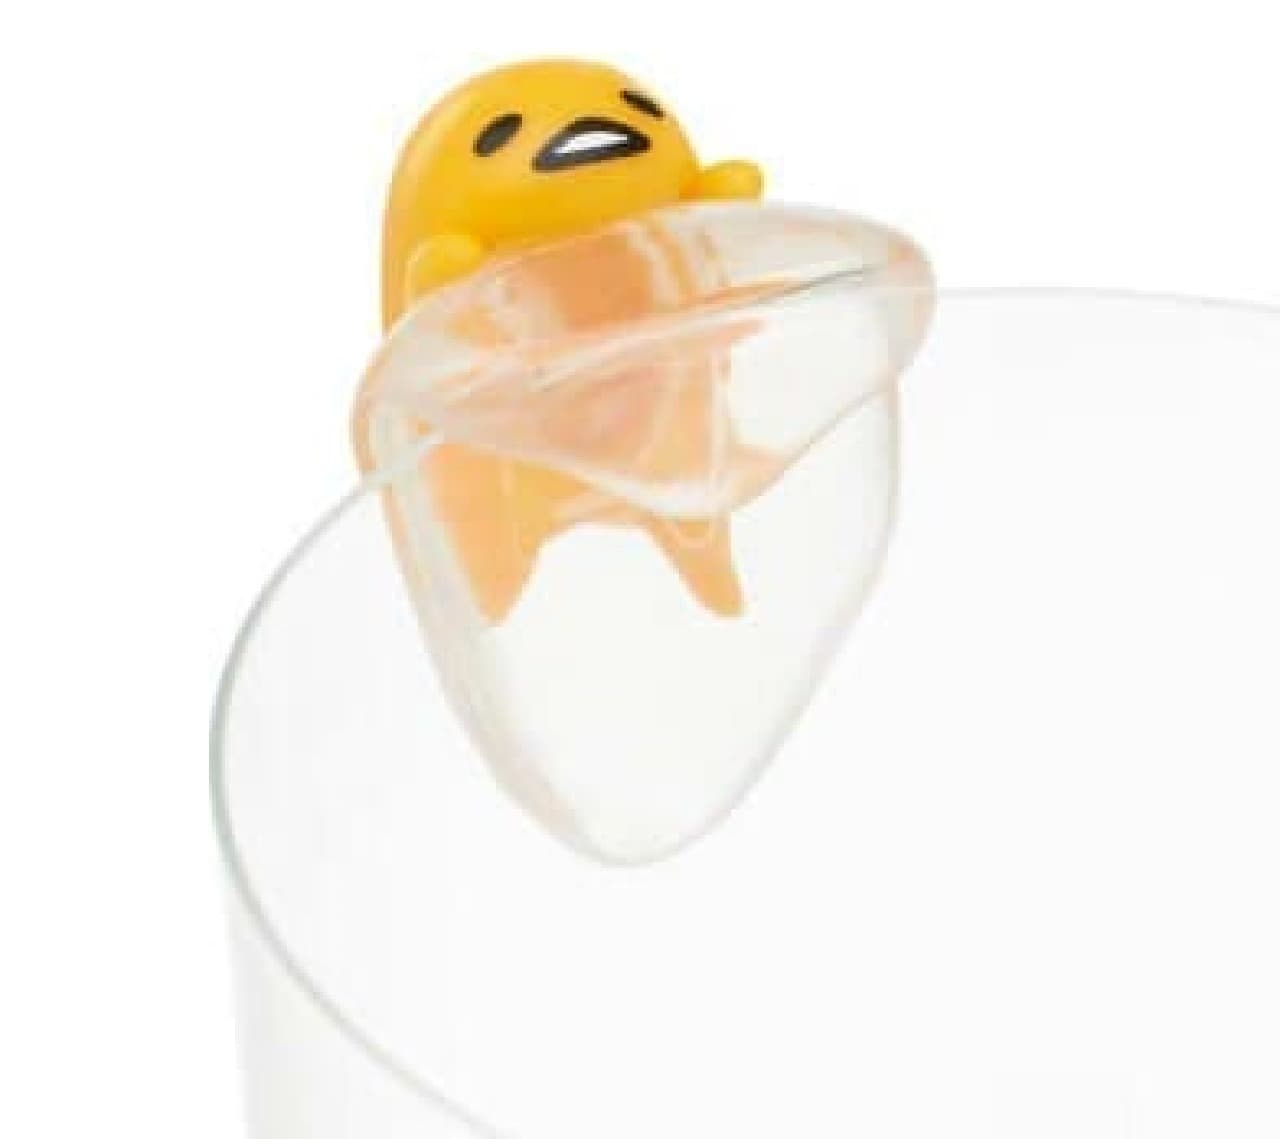 Gudetama caught on the edge of the cup